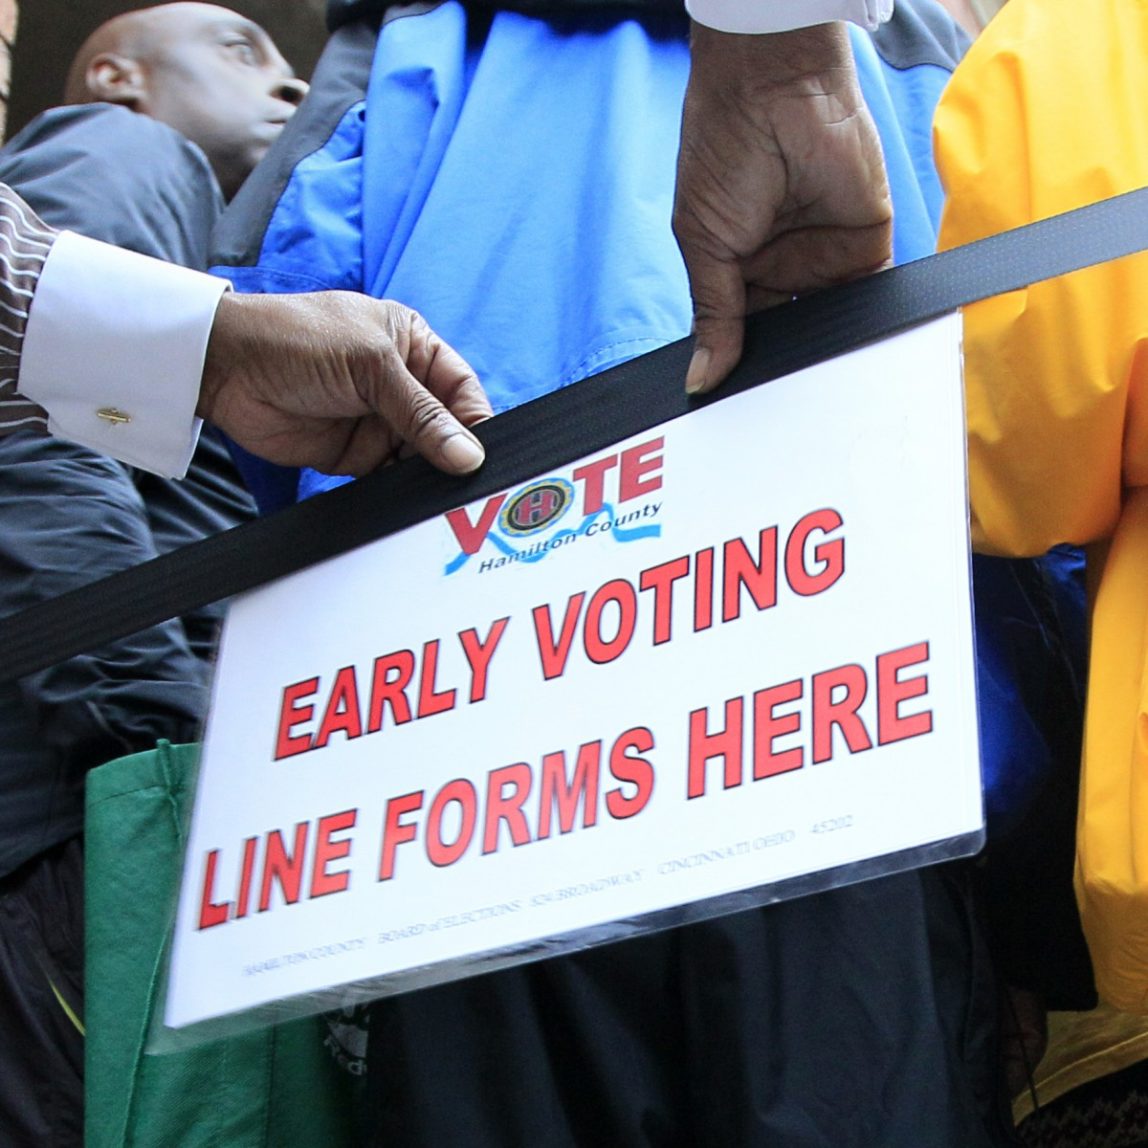 This Oct. 2, 2012 file shows a man placing a sign letting people know where to line up for early voting at the Hamilton County Board of Elections, in Cincinnati. (AP Photo/Al Behrman, File)